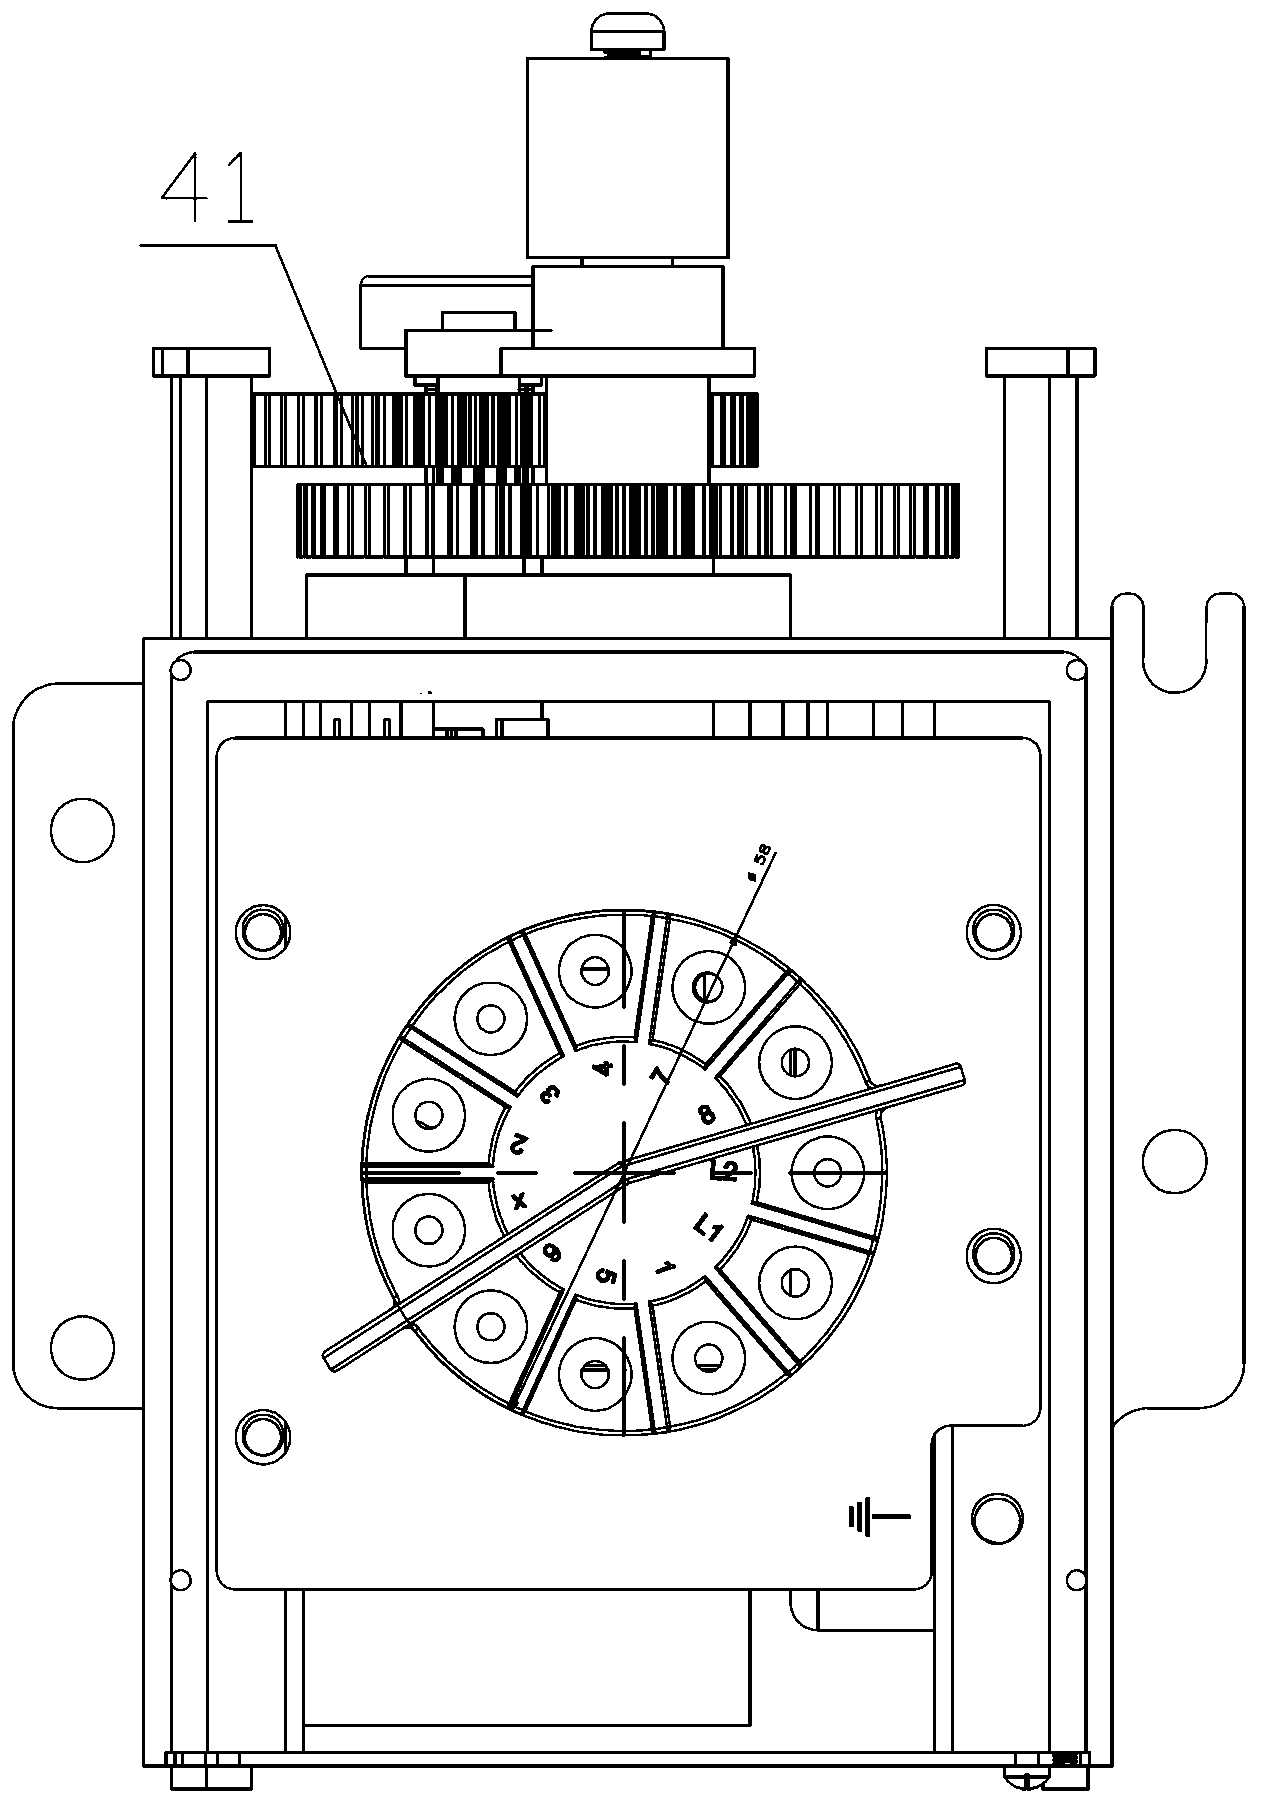 Electric actuator of central air-conditioning centrifuge set